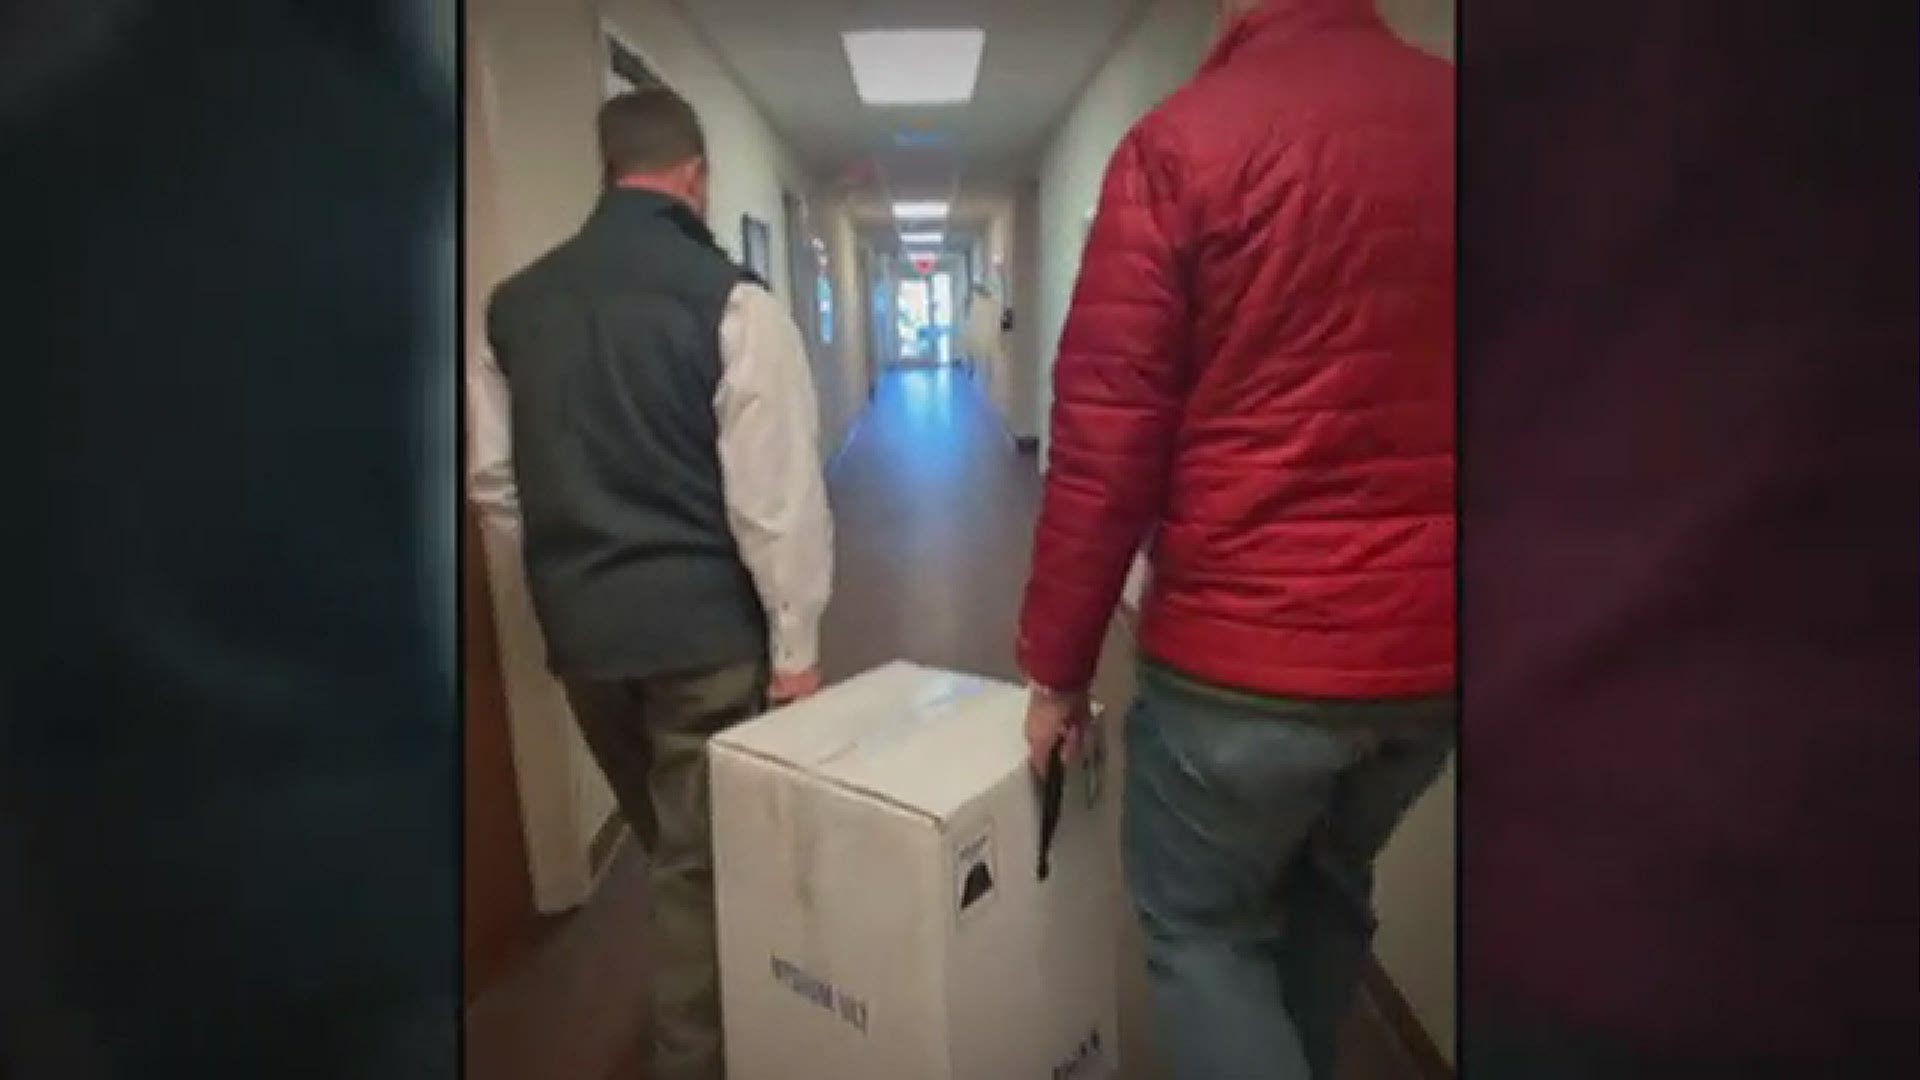 NBC reports state health workers raided the busiest medical clinic in Elbert County and seized its Covid-19 vaccine supply.